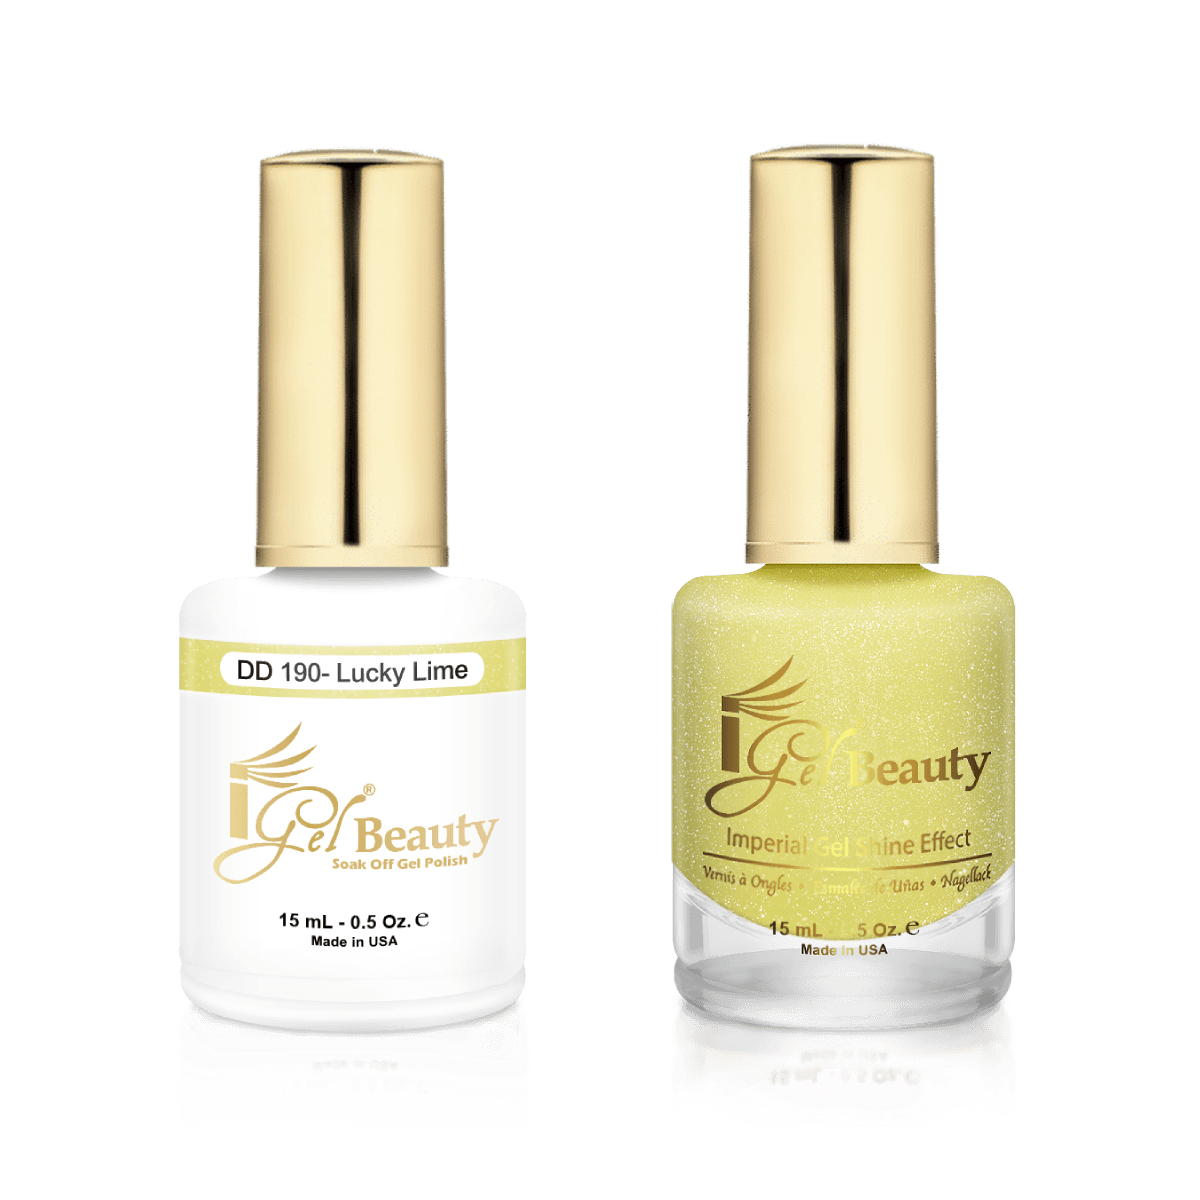 IGel Duo Gel Polish + Matching Nail Lacquer DD 190 LUCKY LIME